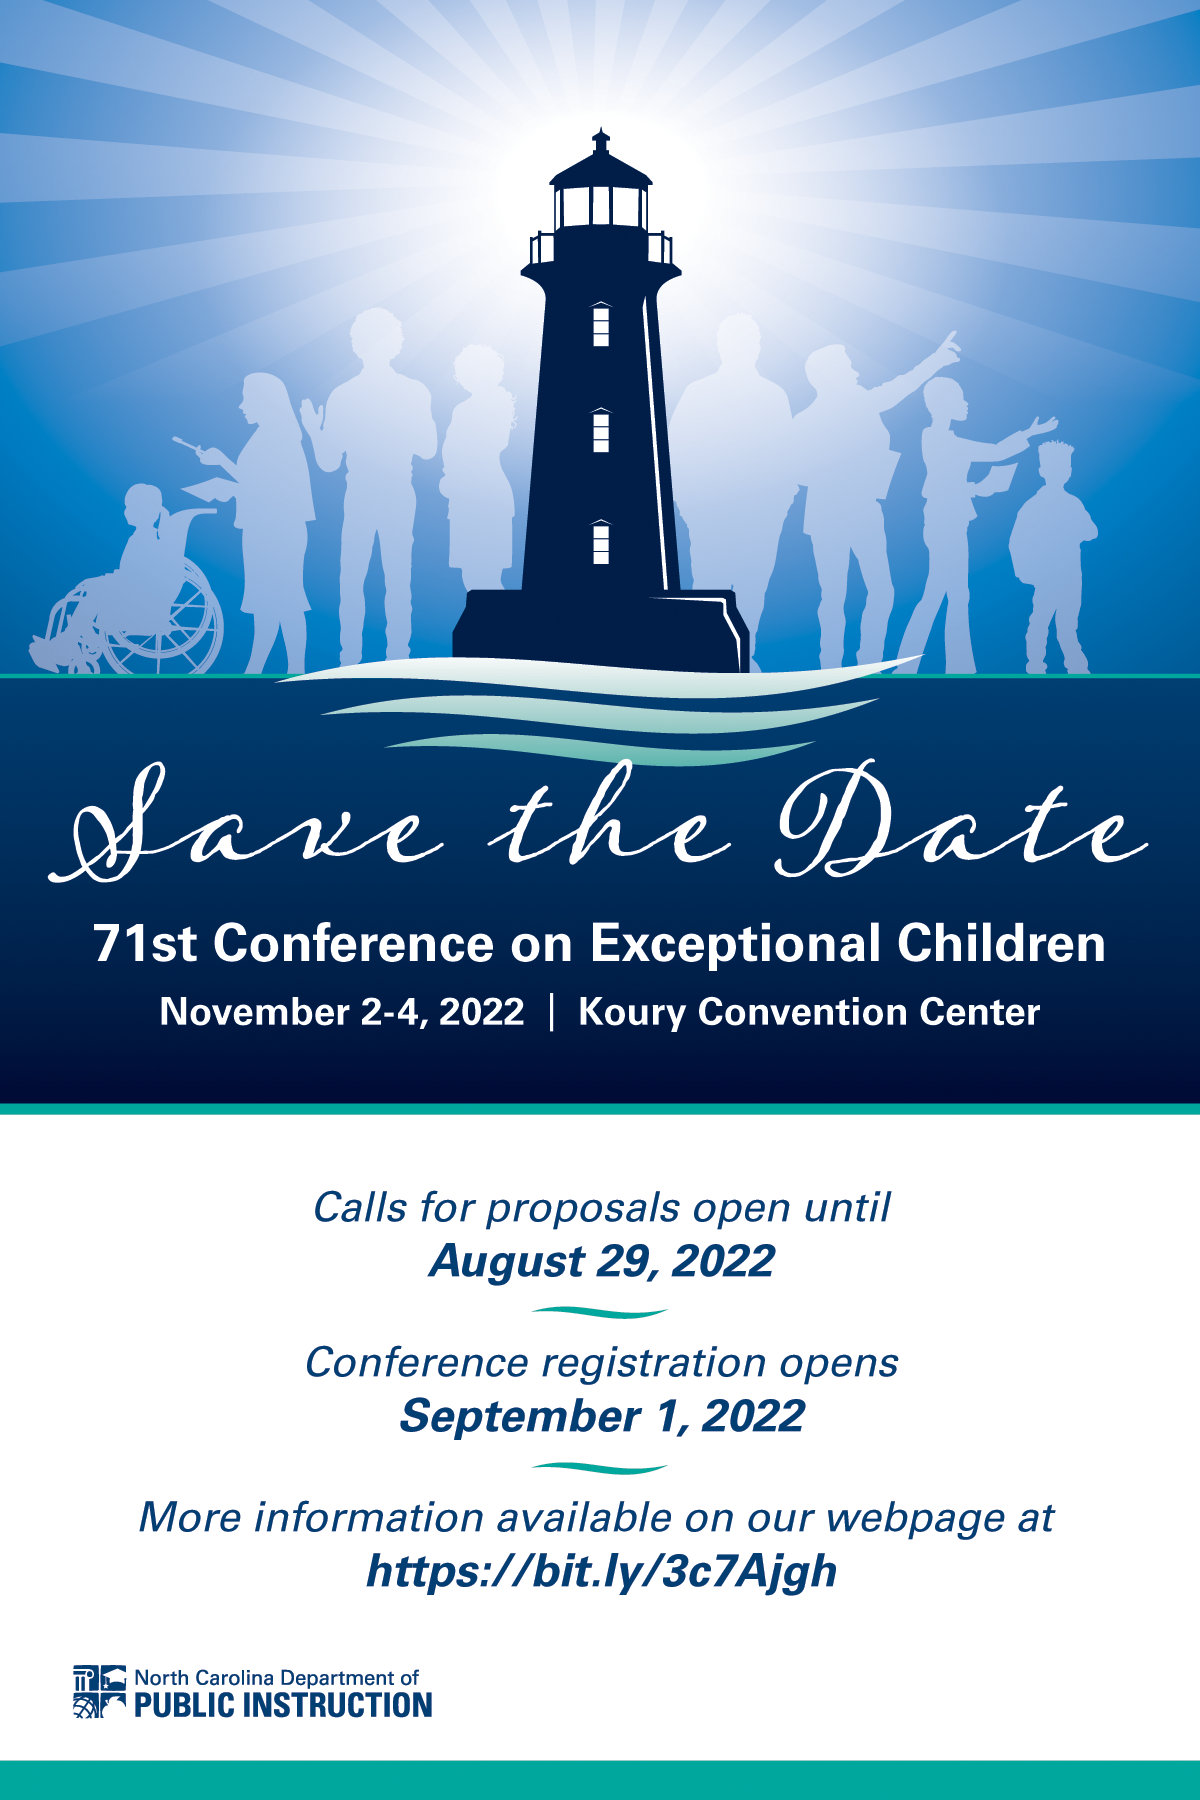 Save the Date - Conference on Exceptional Children